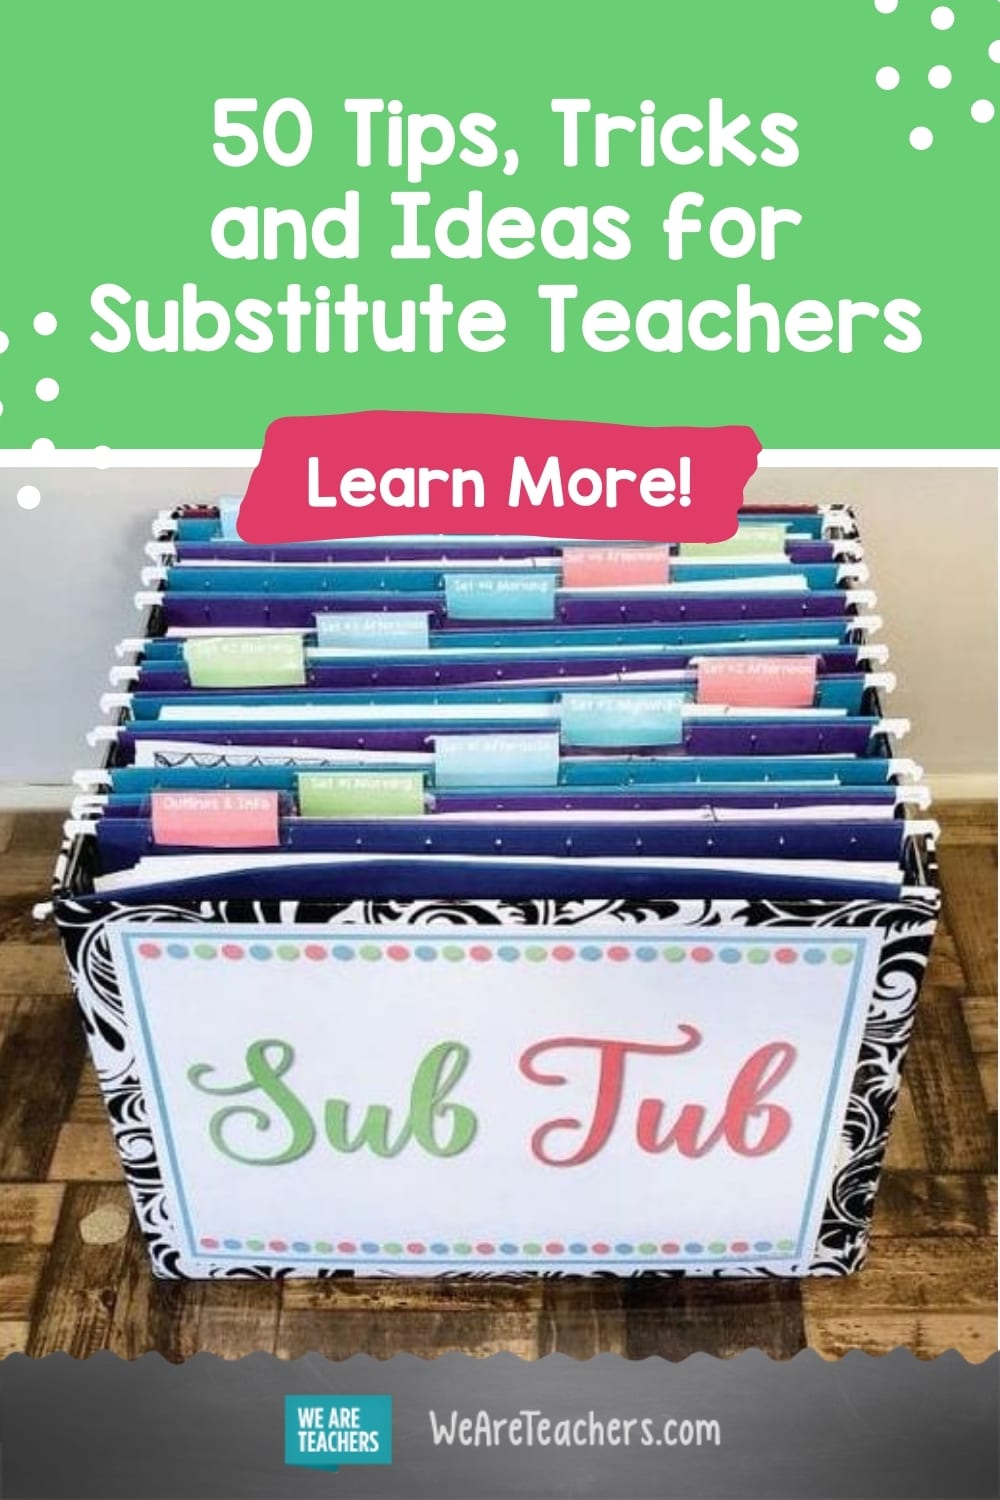 50-tips-tricks-and-ideas-for-substitute-teachers-we-are-teachers